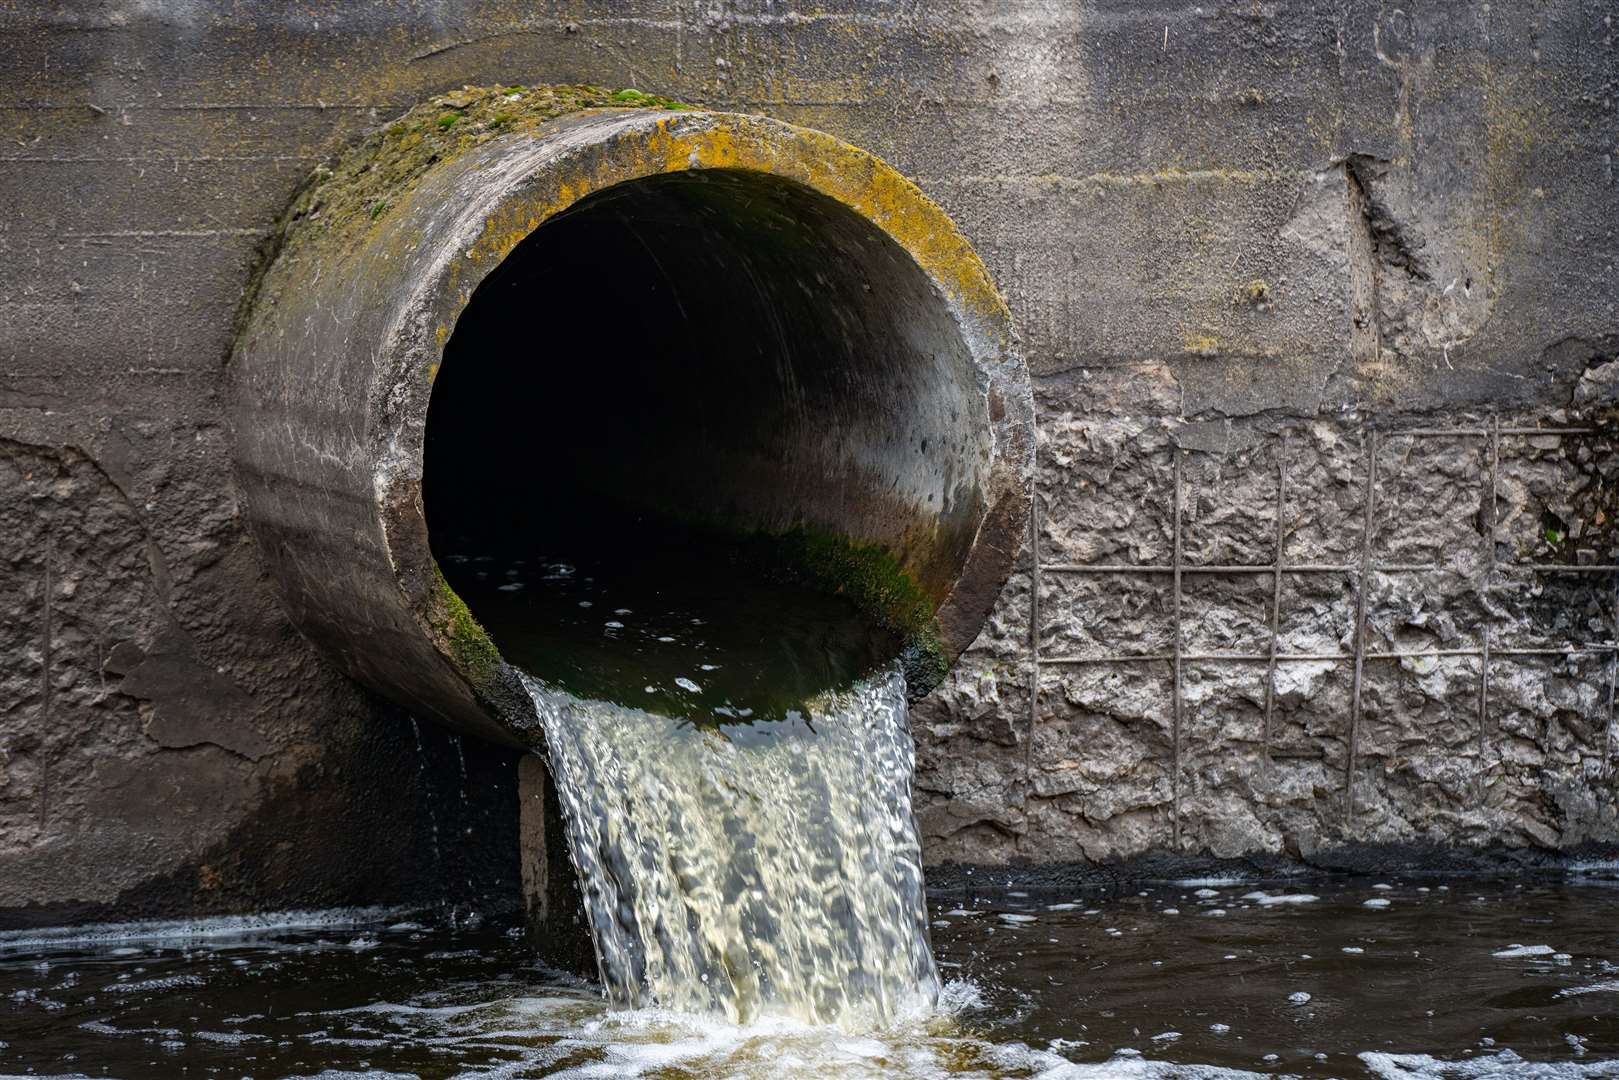 Sewage spills have become an increasing problem around the country.